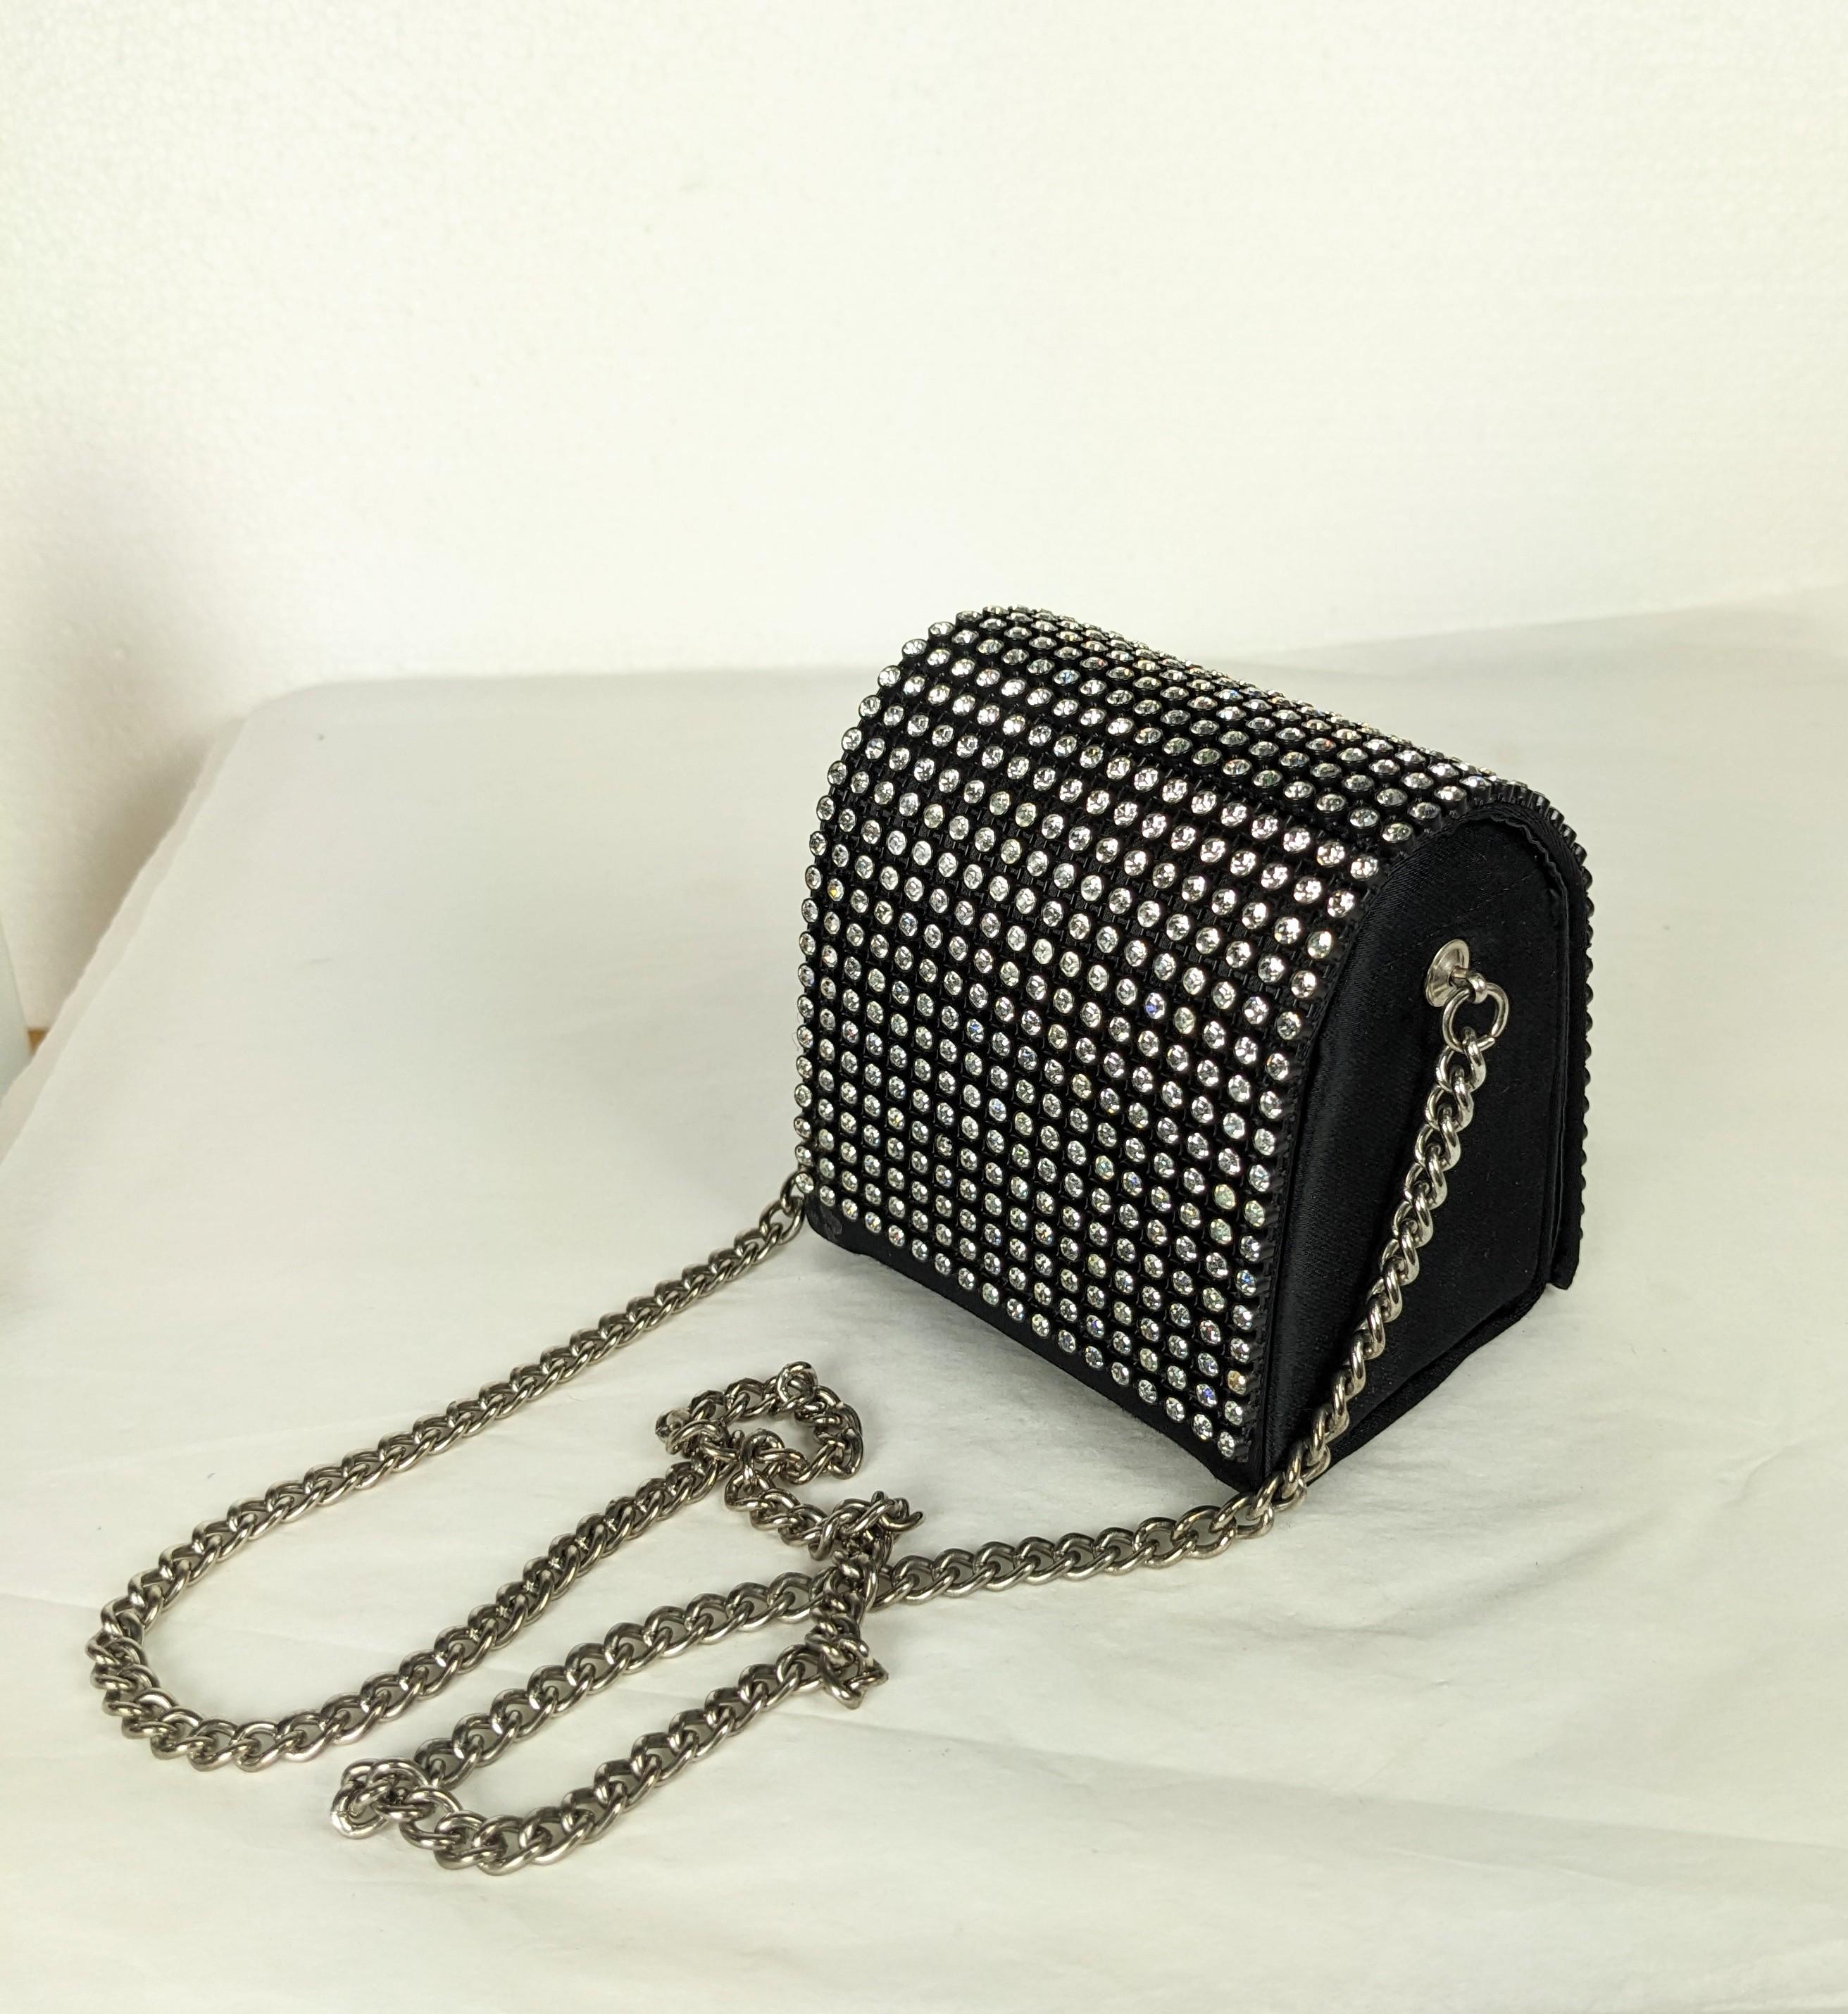 Women's Arnold Scassi Pave Cube Novelty Bag For Sale